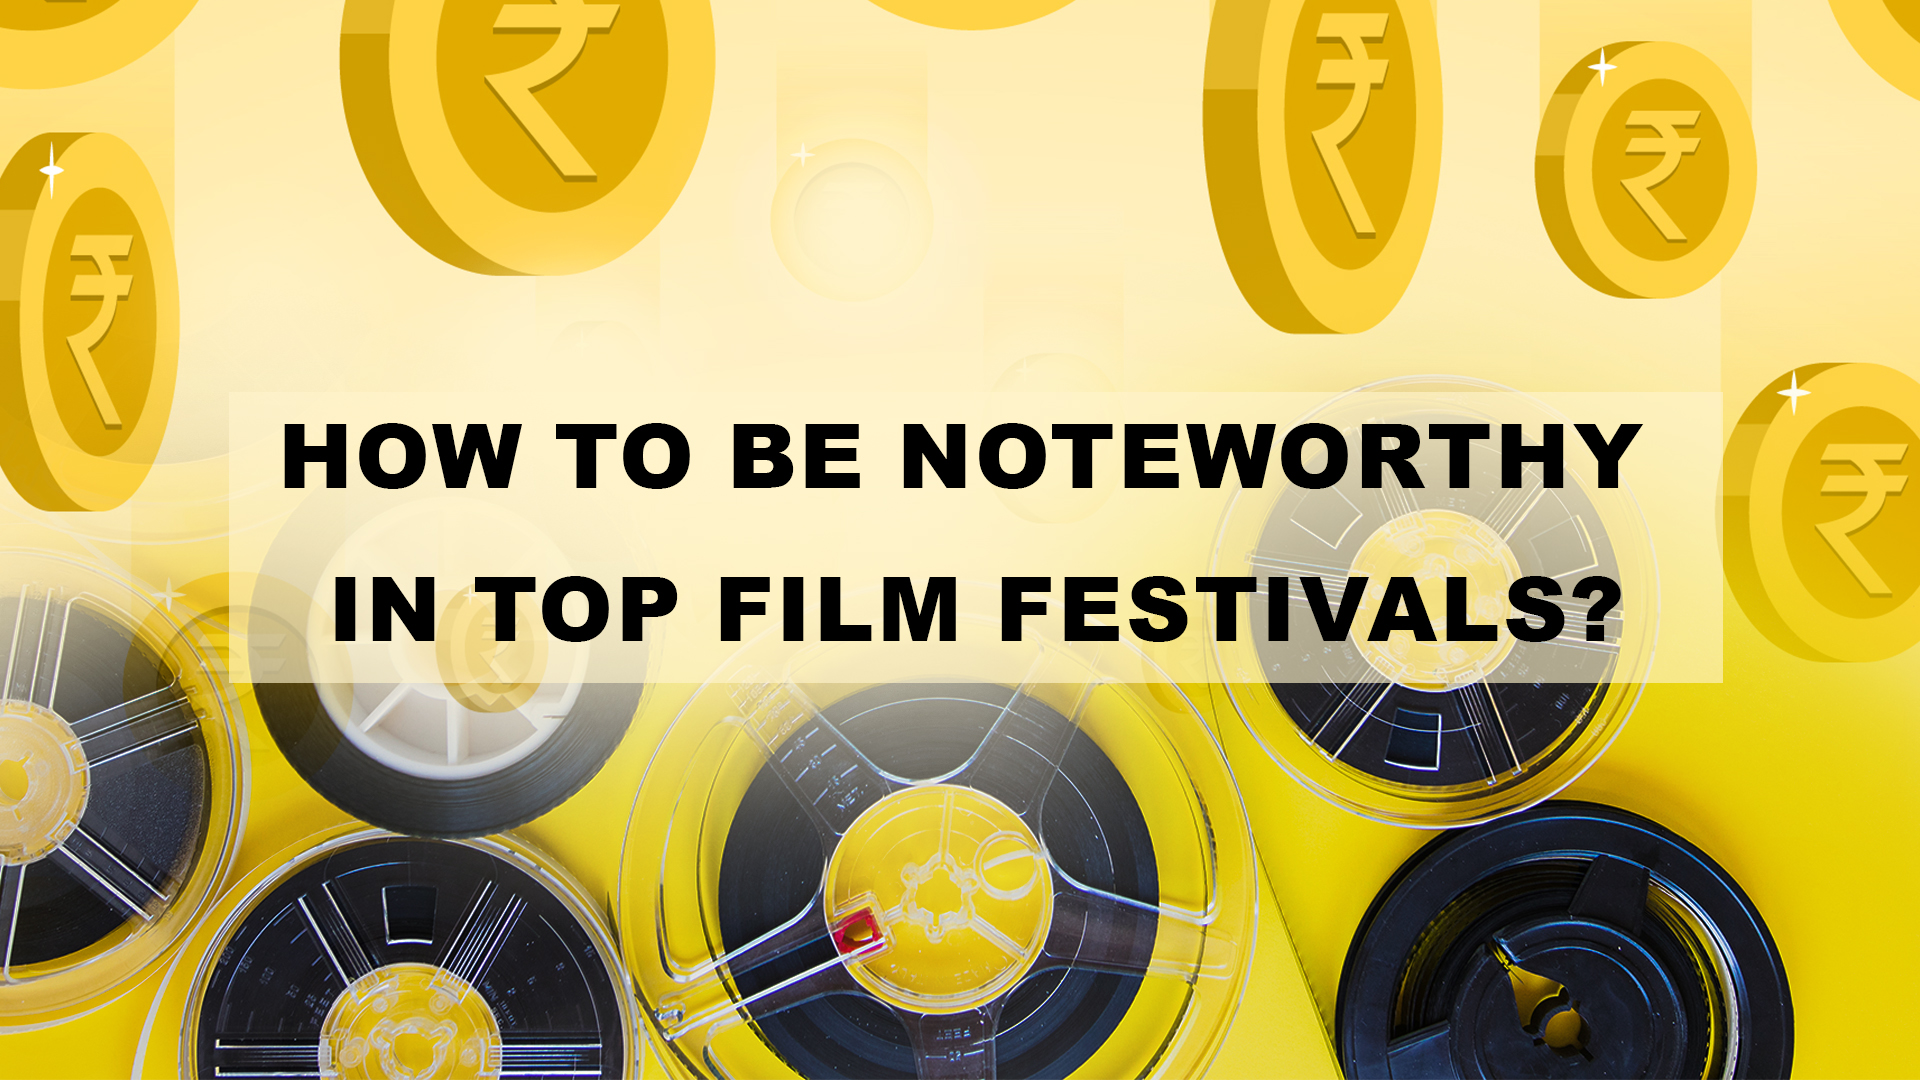 HOW TO BE NOTEWORTHY IN ANY TOP FILM FESTIVALS?